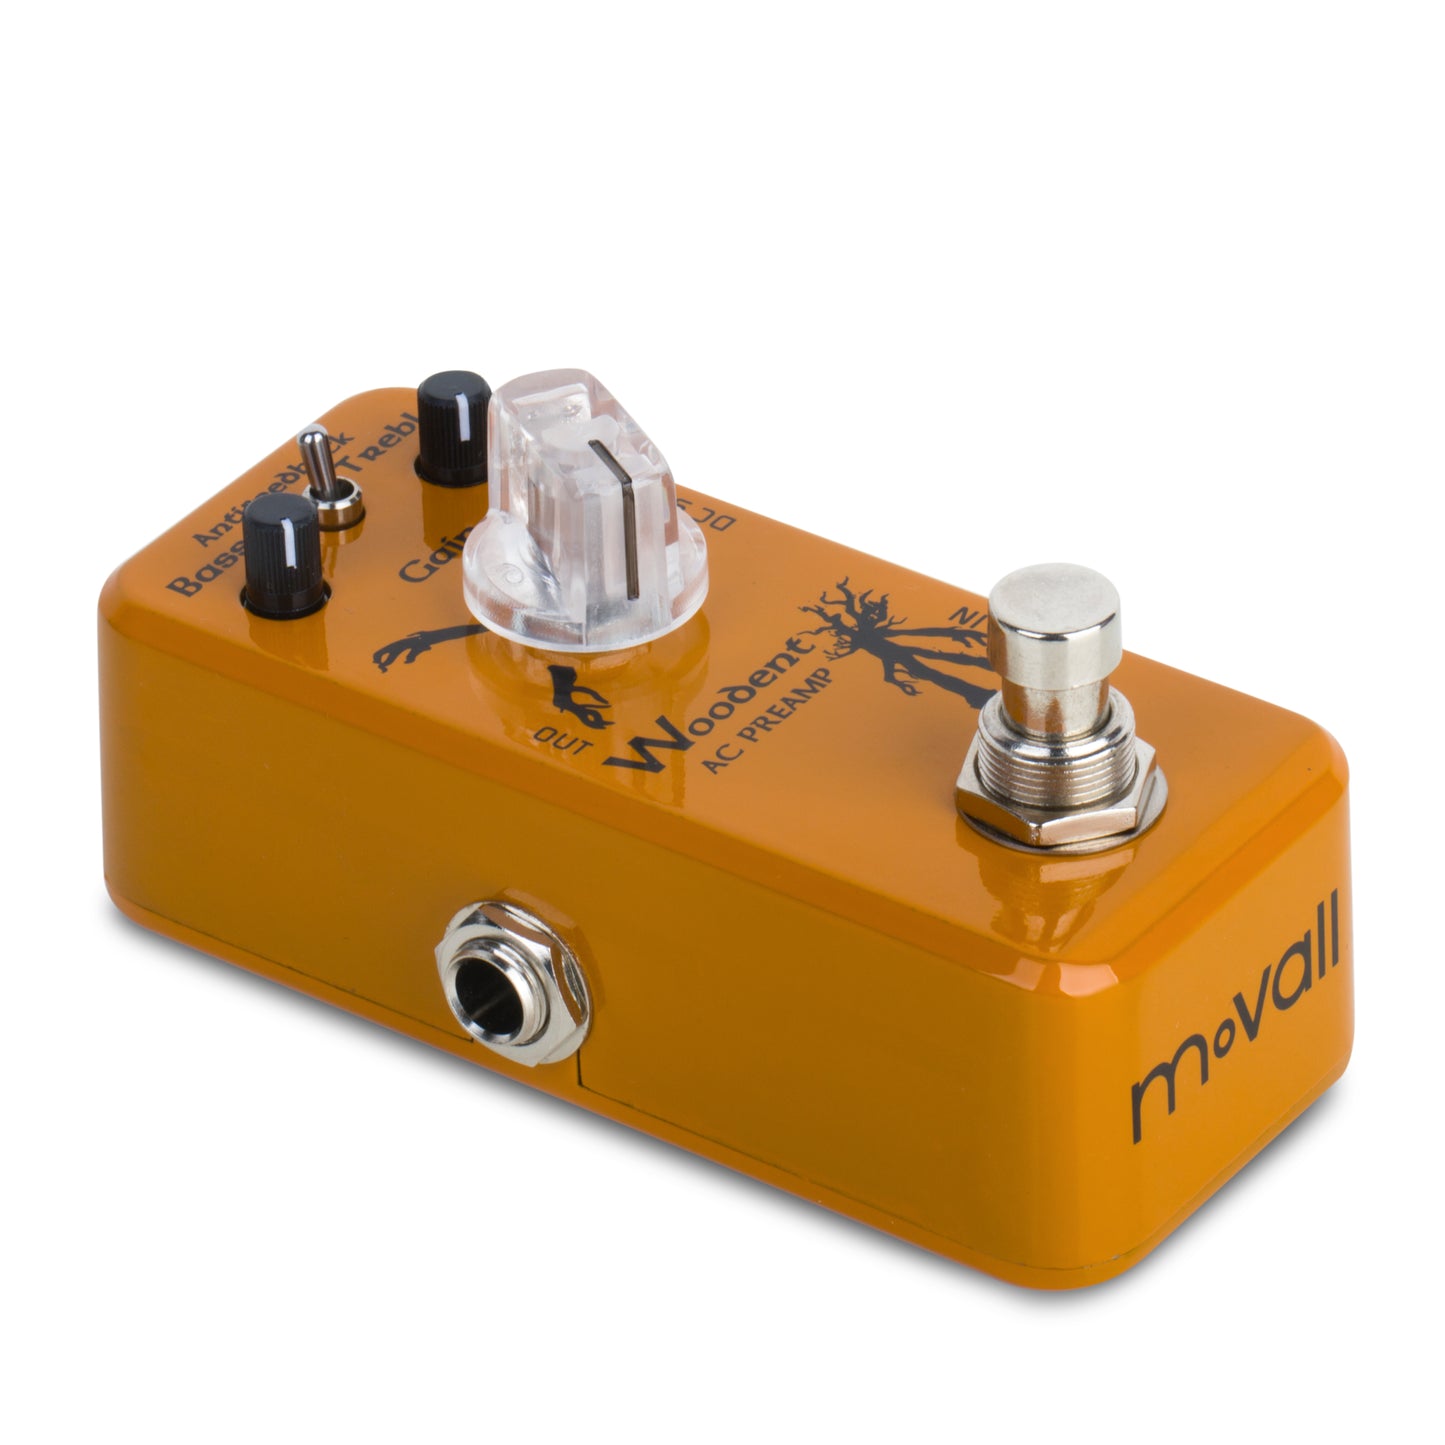 Movall MP-318 Woodent AC Preamp Mini Acoustic Preamp Pedal